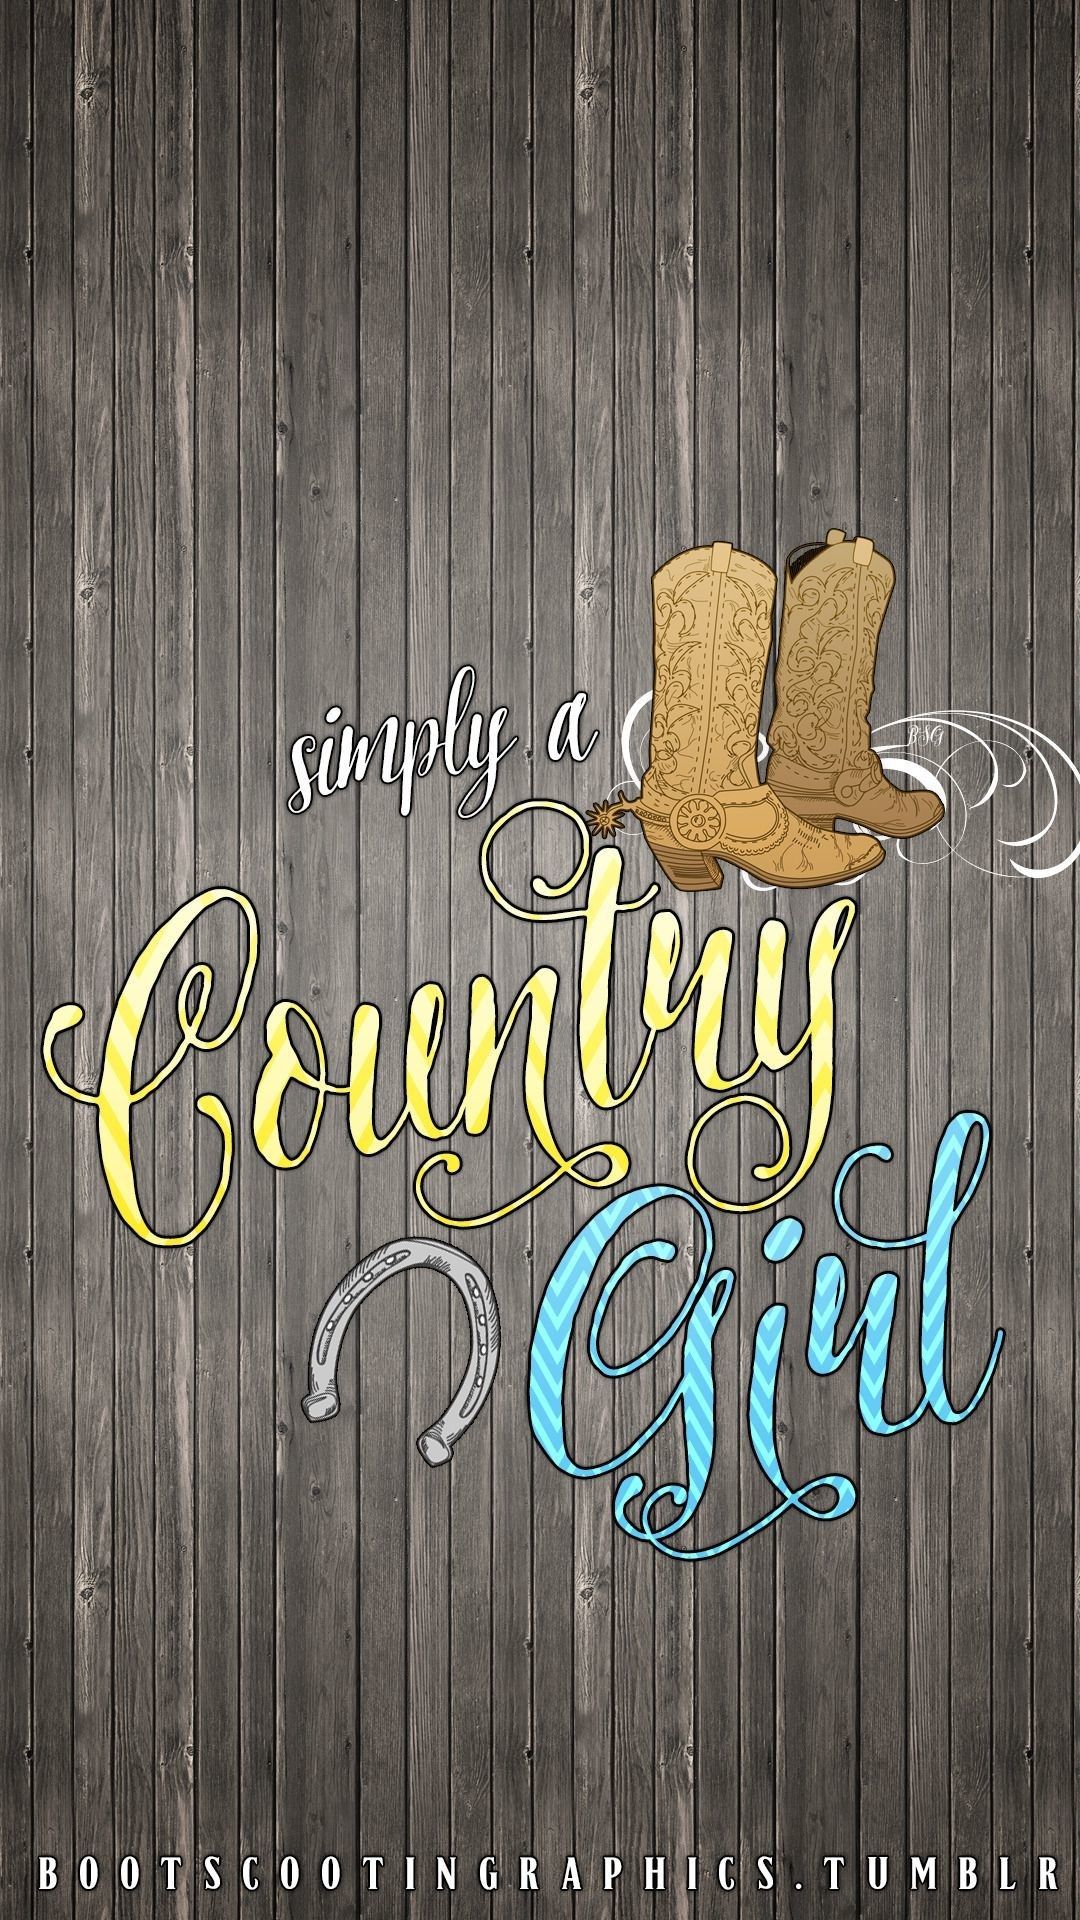 tumblr country girl quotes